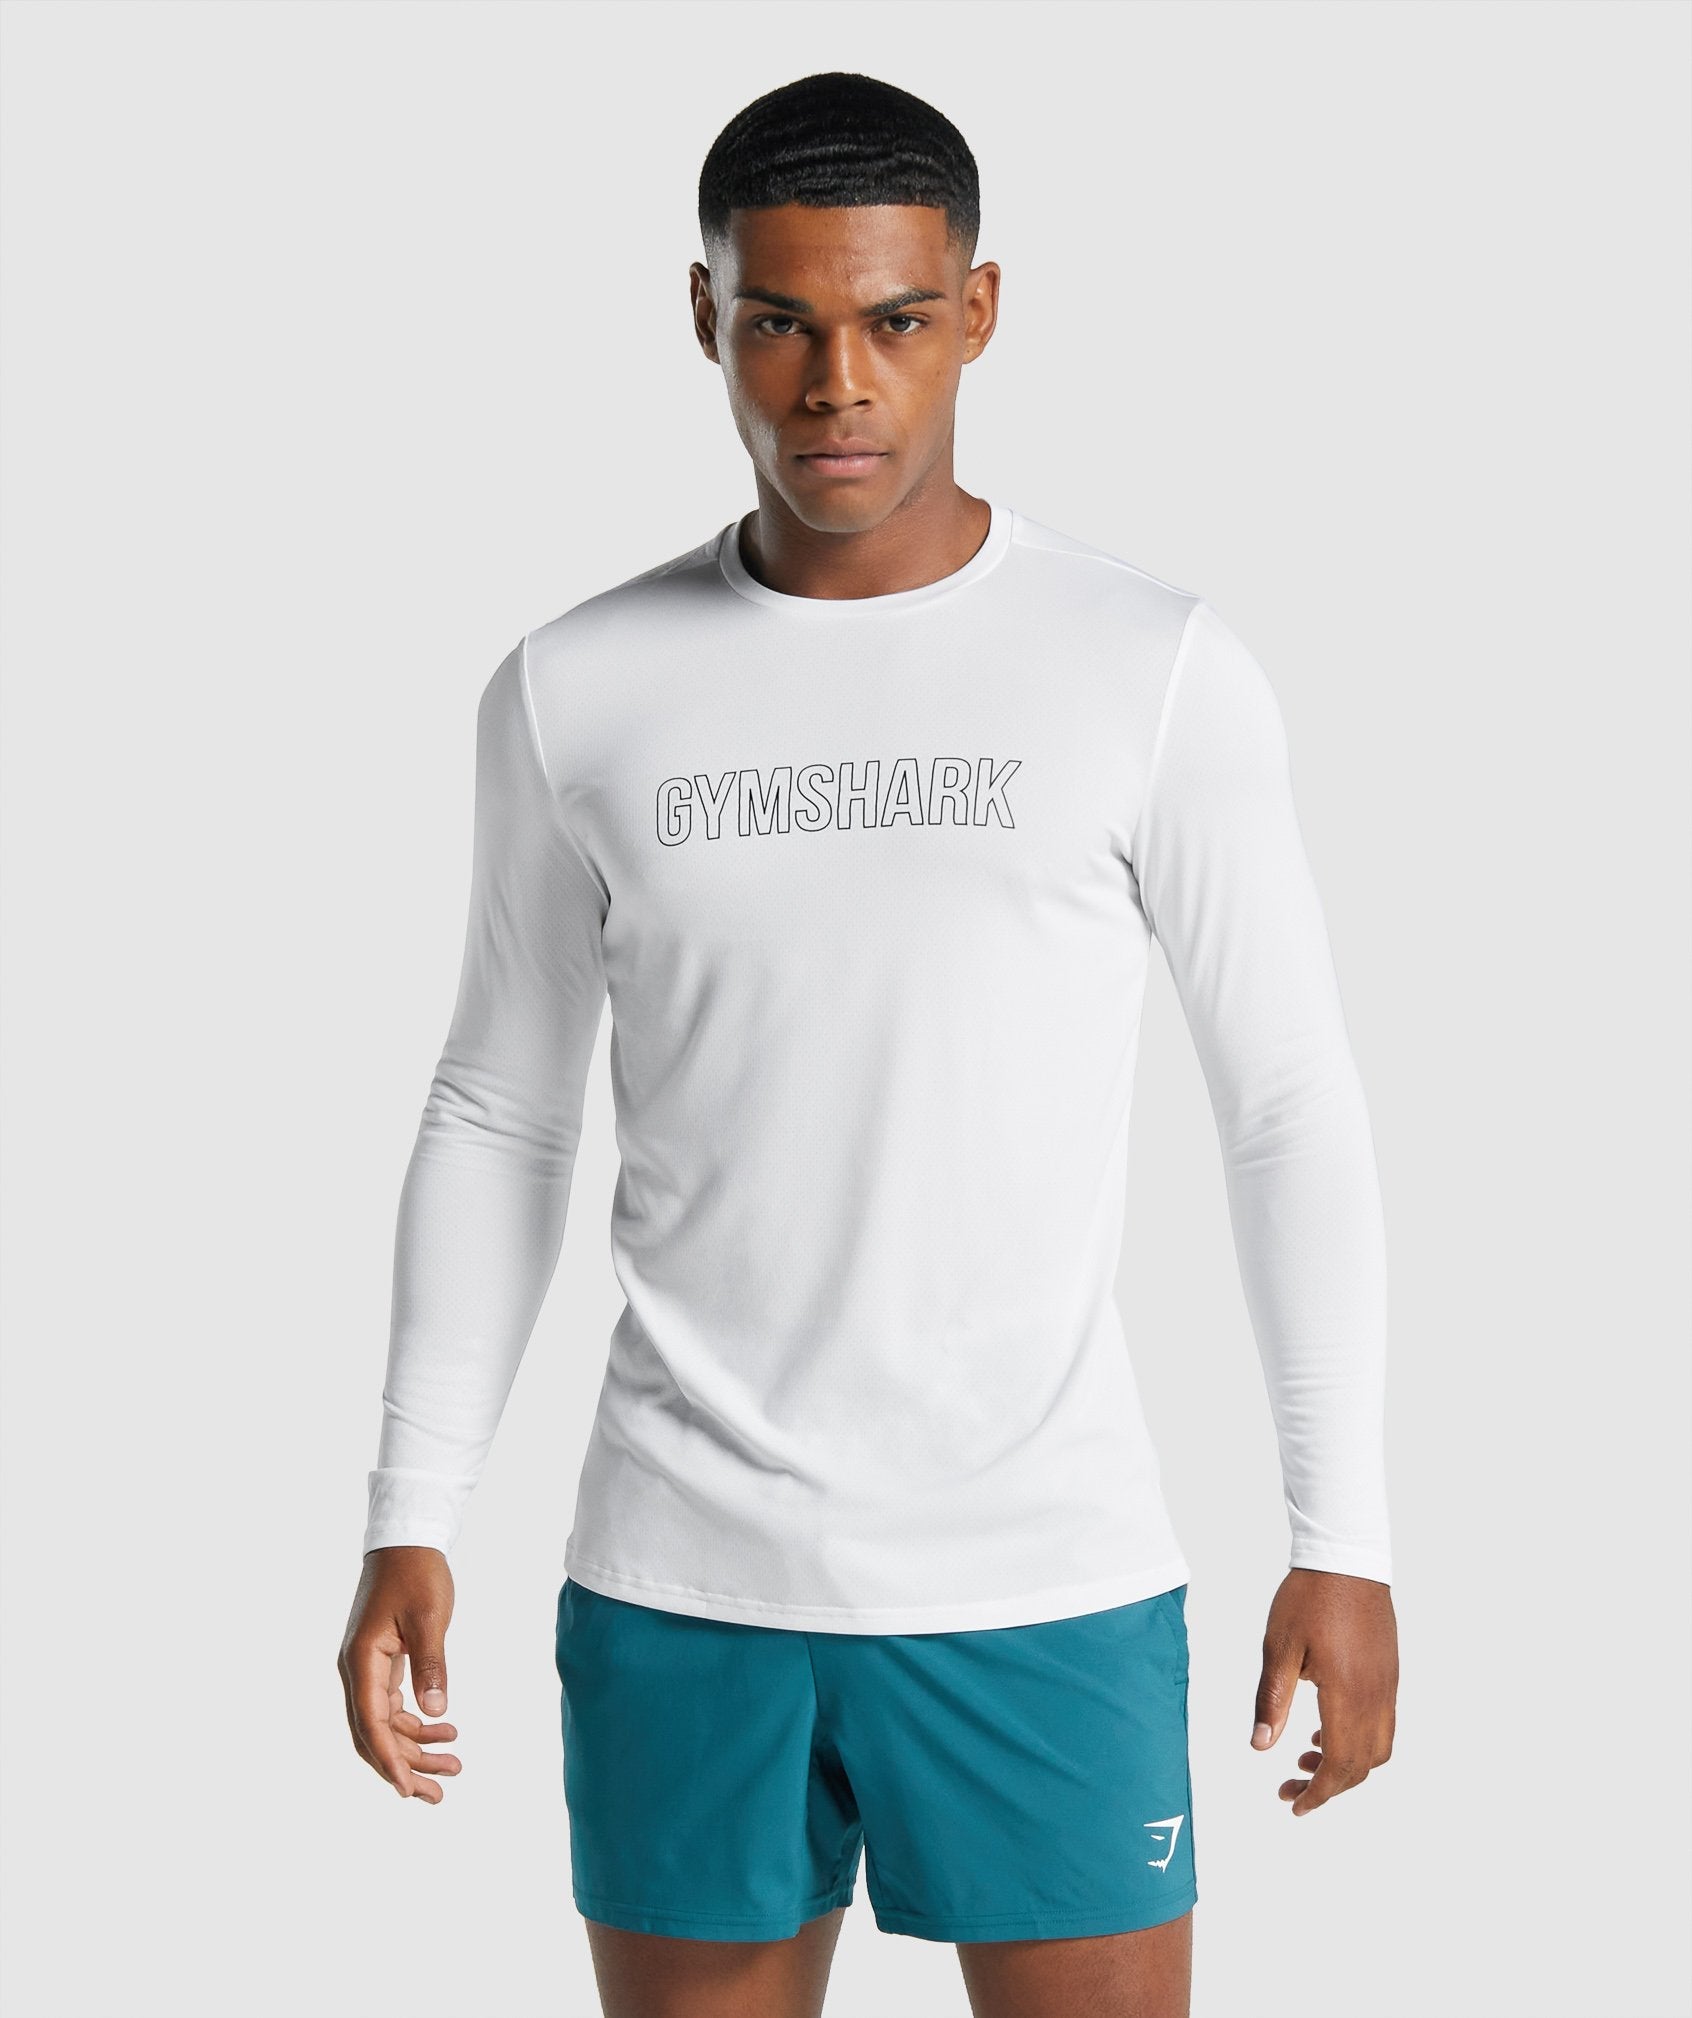 Arrival Long Sleeve Graphic T-Shirt in White - view 1